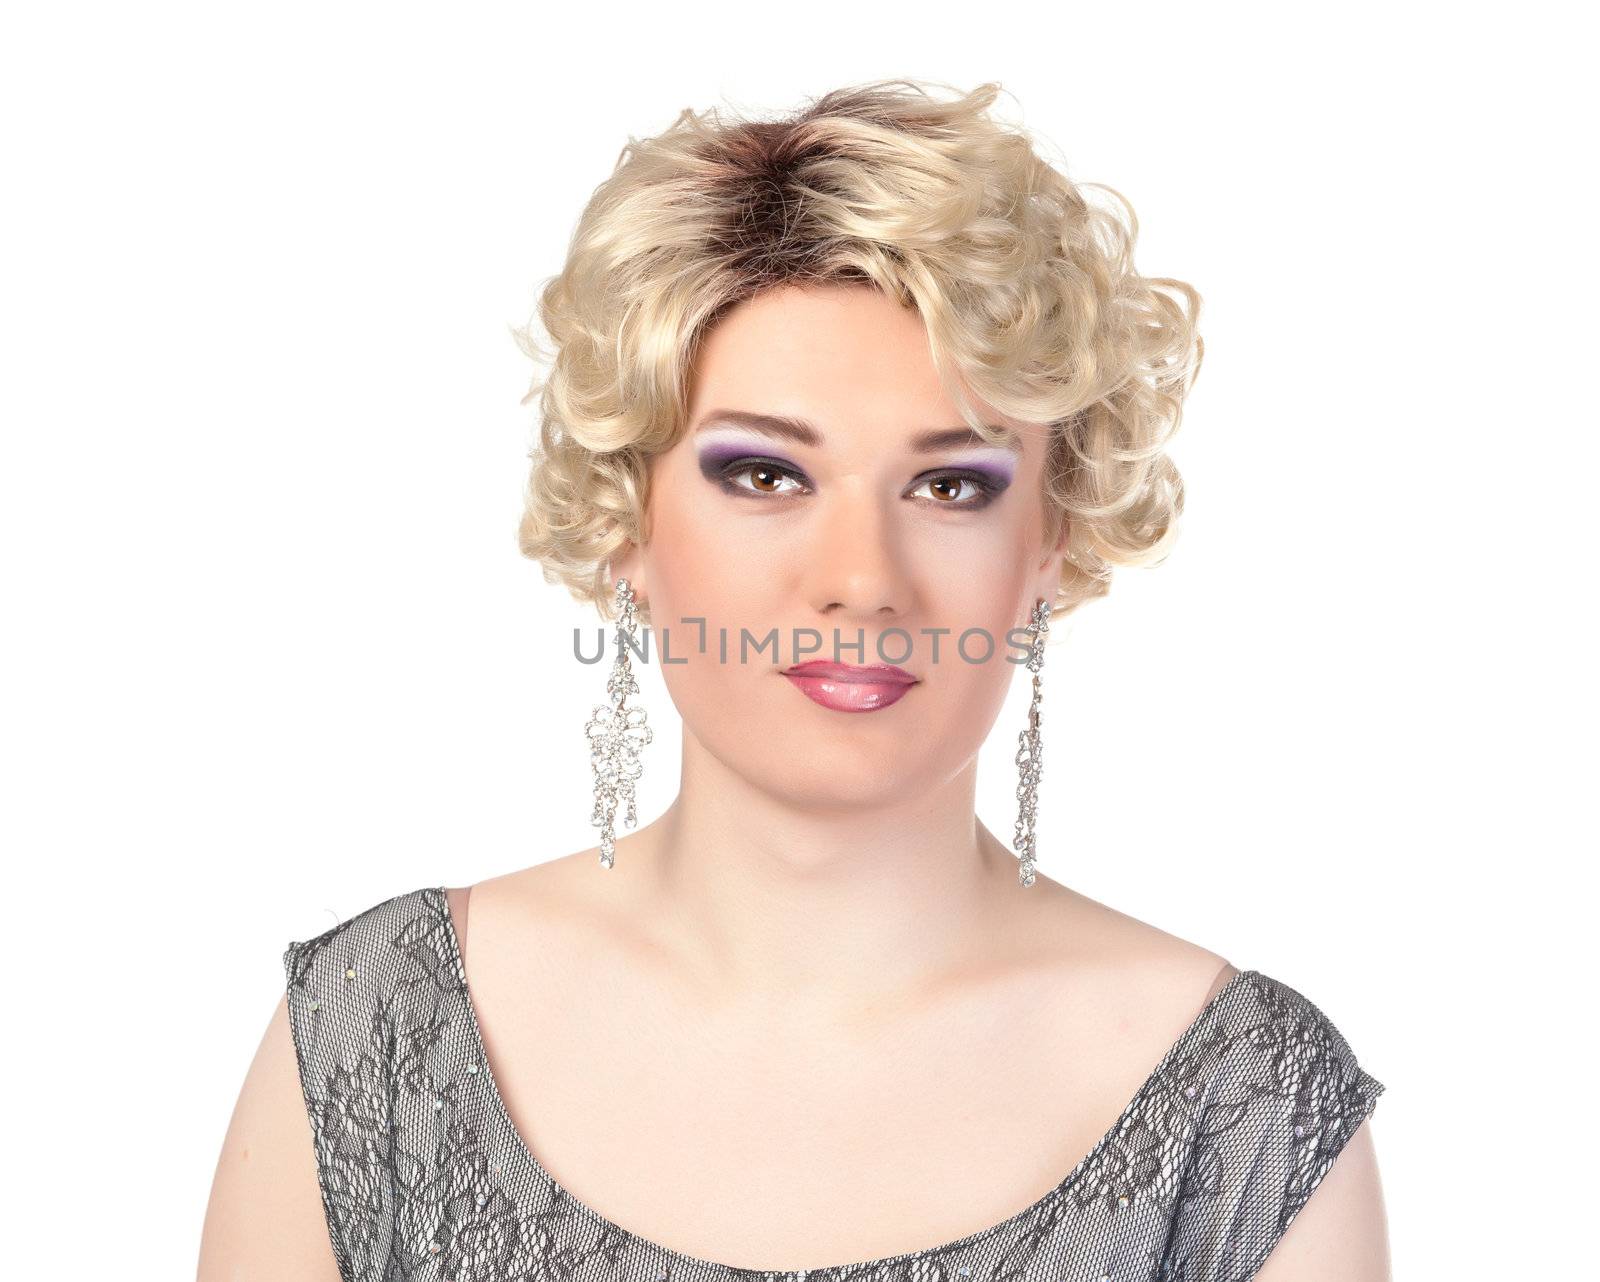 Portrait of drag queen. Man dressed as Woman by Discovod